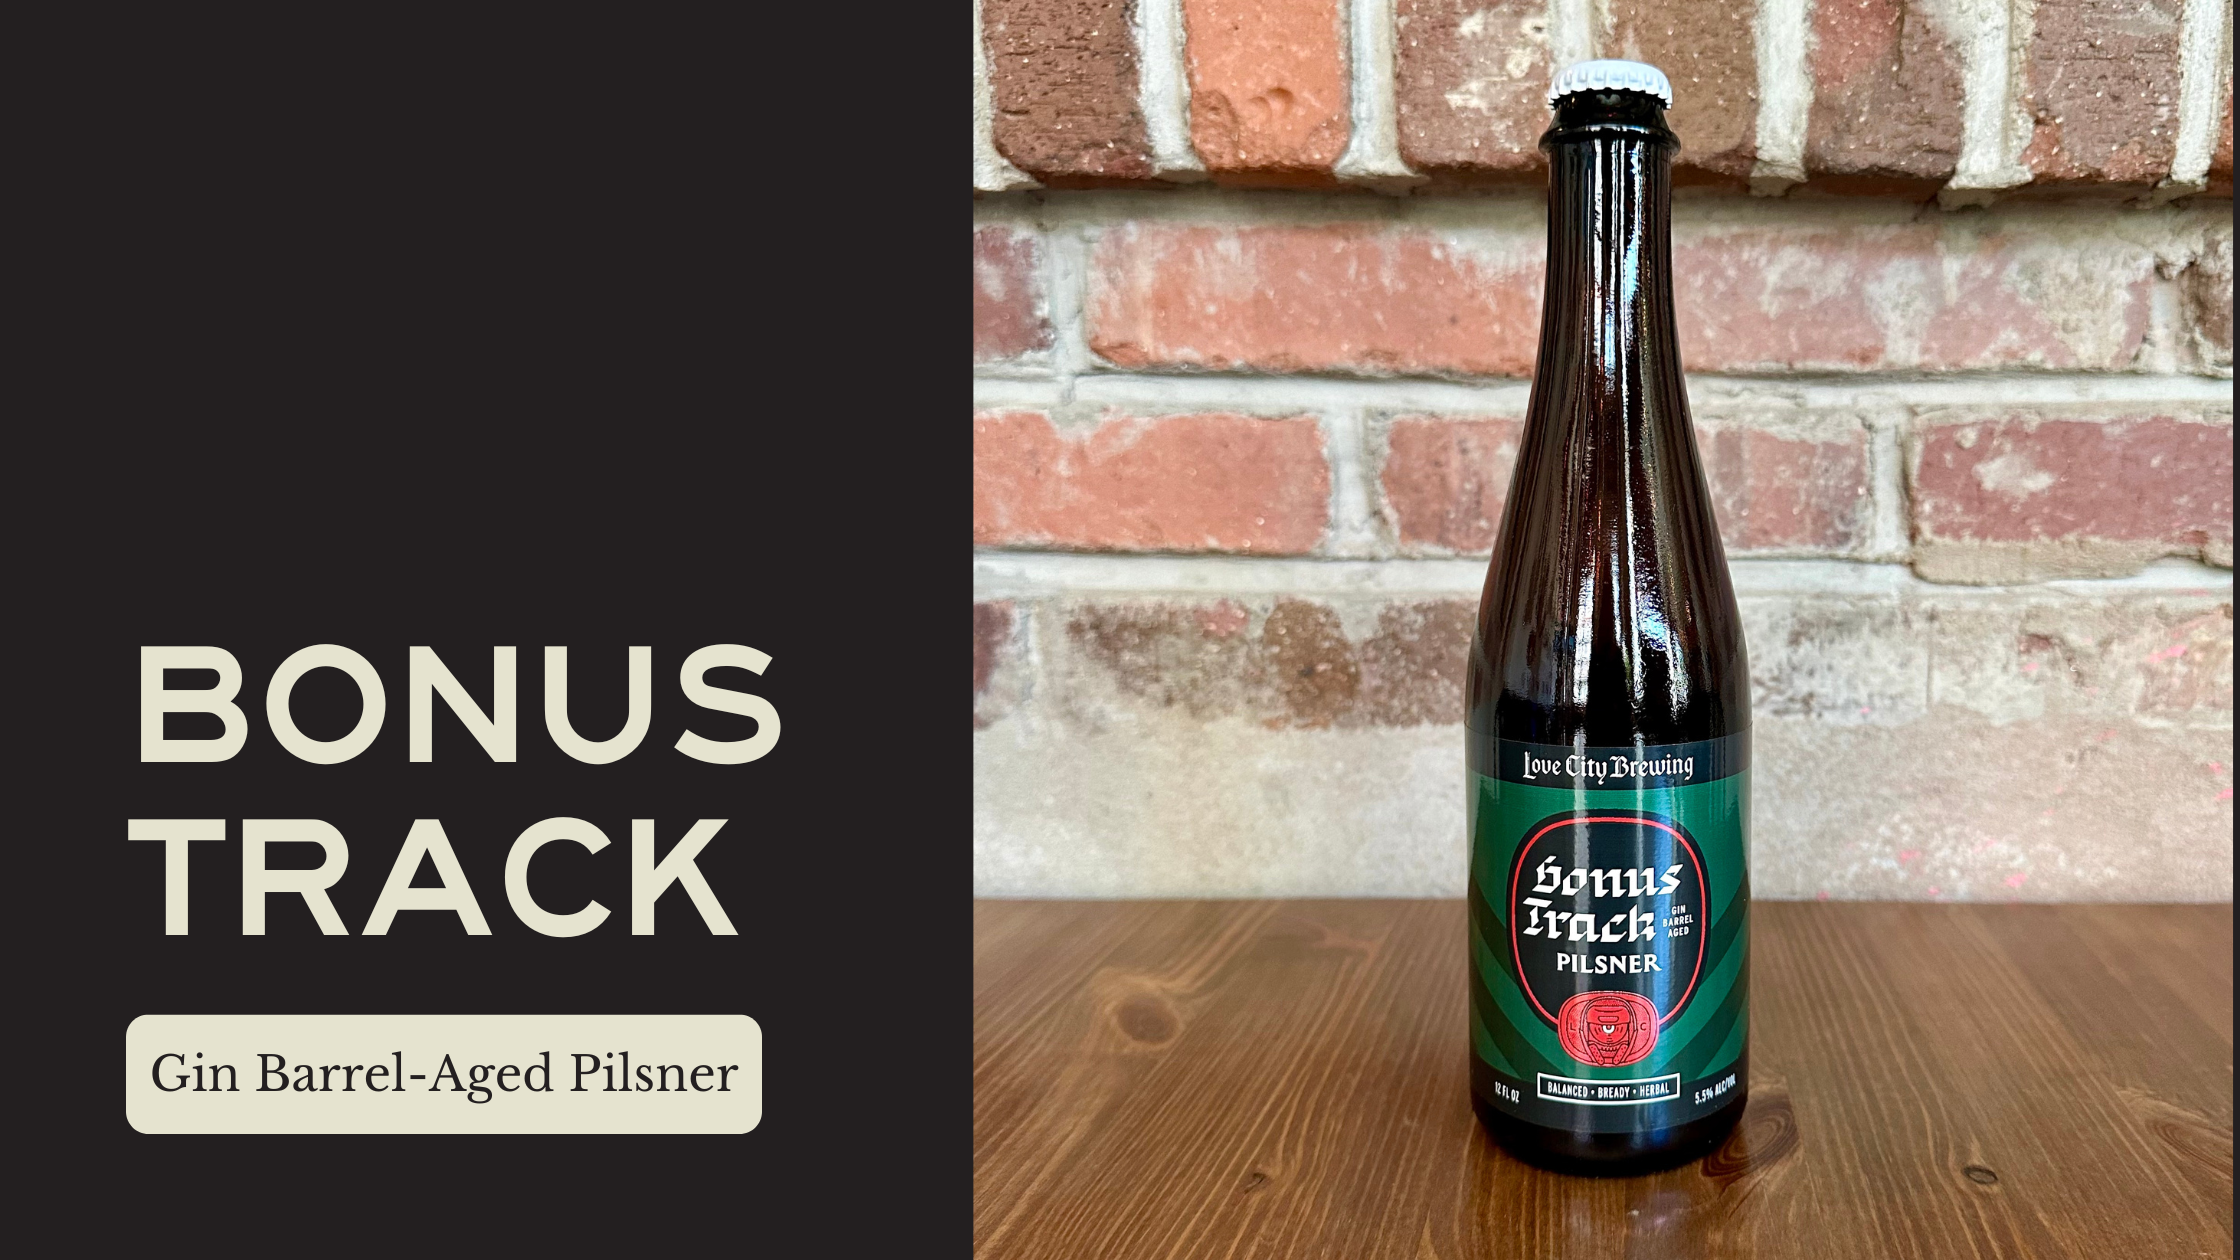  Bonus Track is a mixed culture beer that began its life as Hype Track Pilsner first brewed for our 5th anniversary in April 2023. It rested for 12 months in a Philadelphia Distilling Bluecoat Gin barrel with Brettanomyces, lemongrass, and rose-hips.